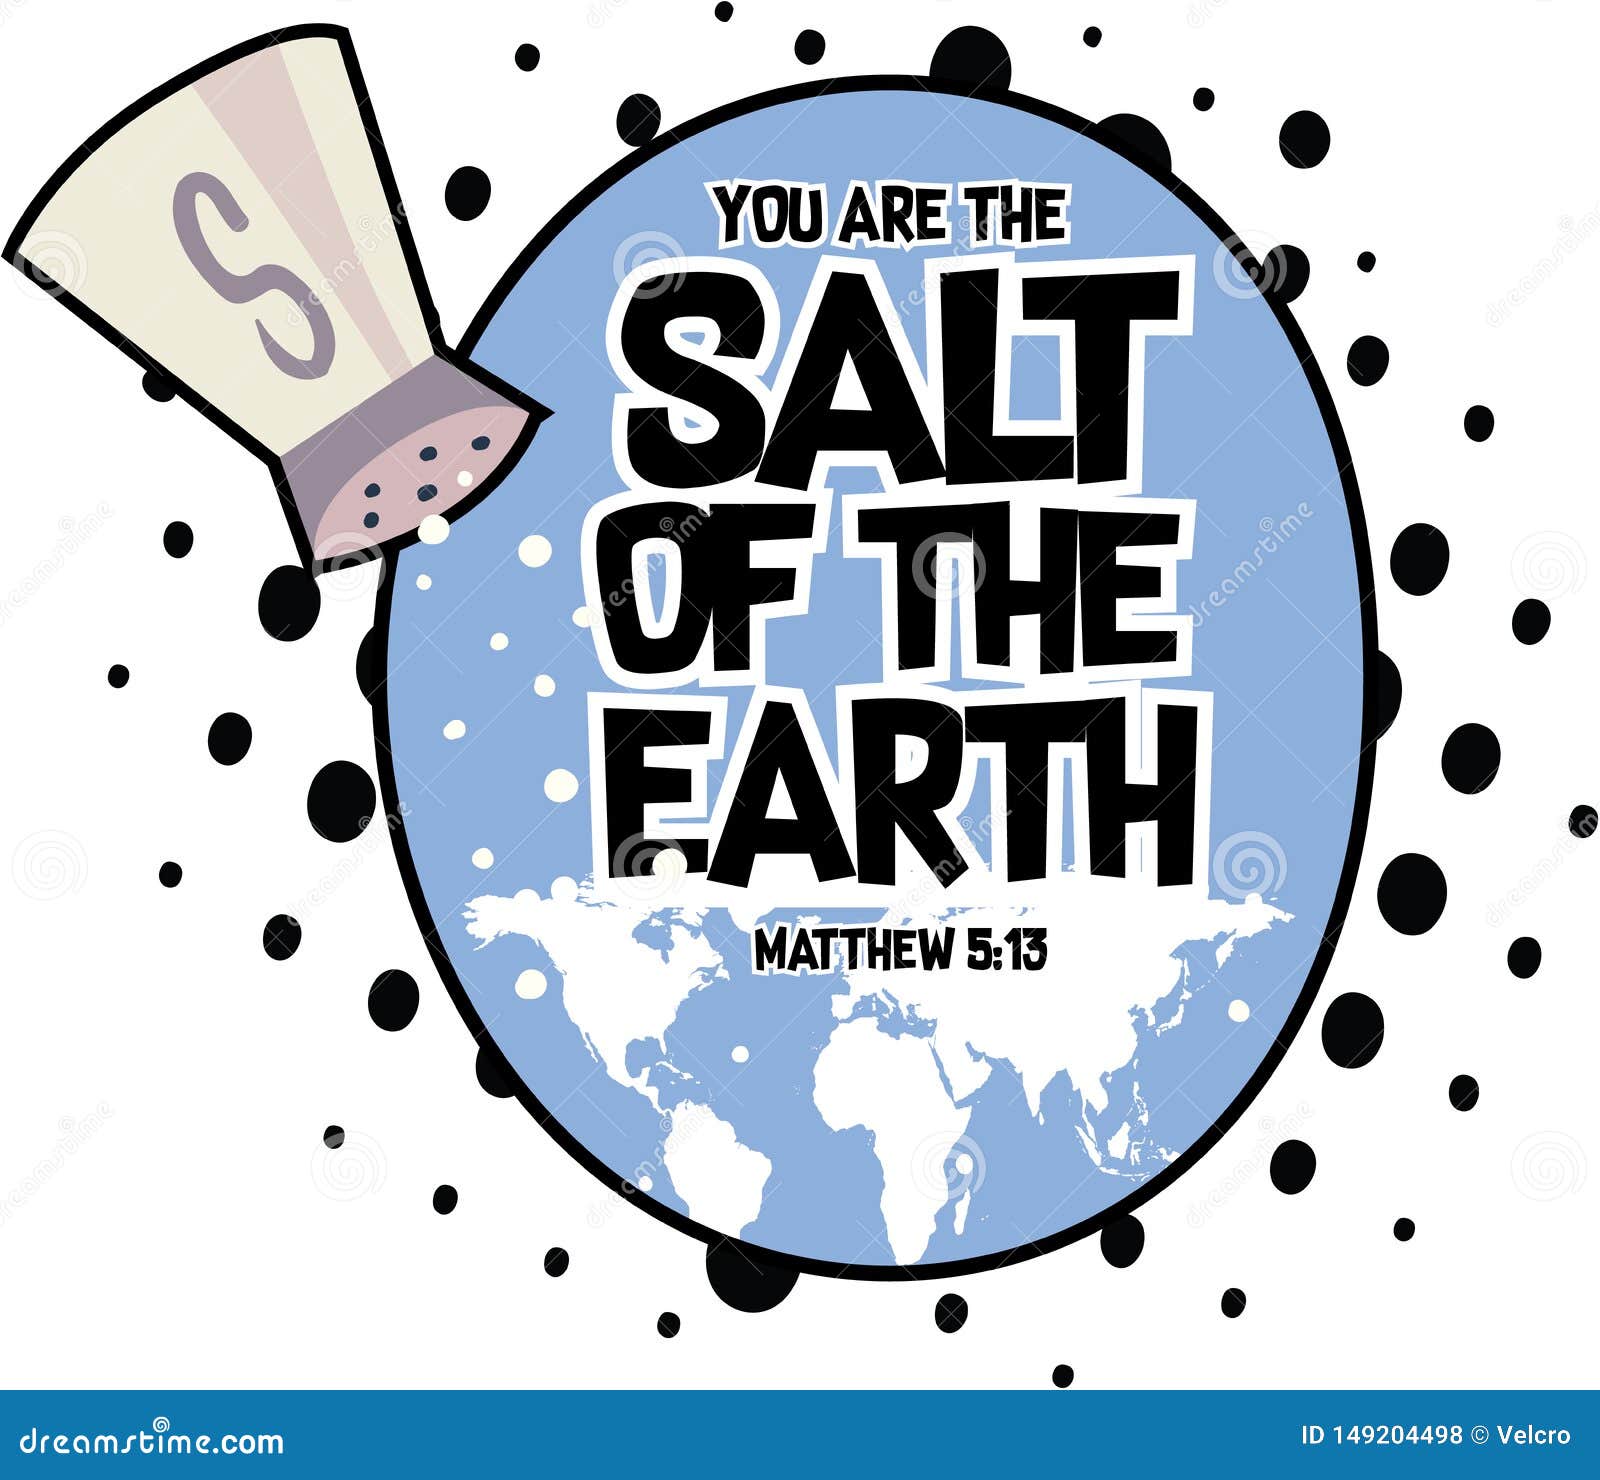 Top 93+ Images illustrations of being the salt of the earth Excellent